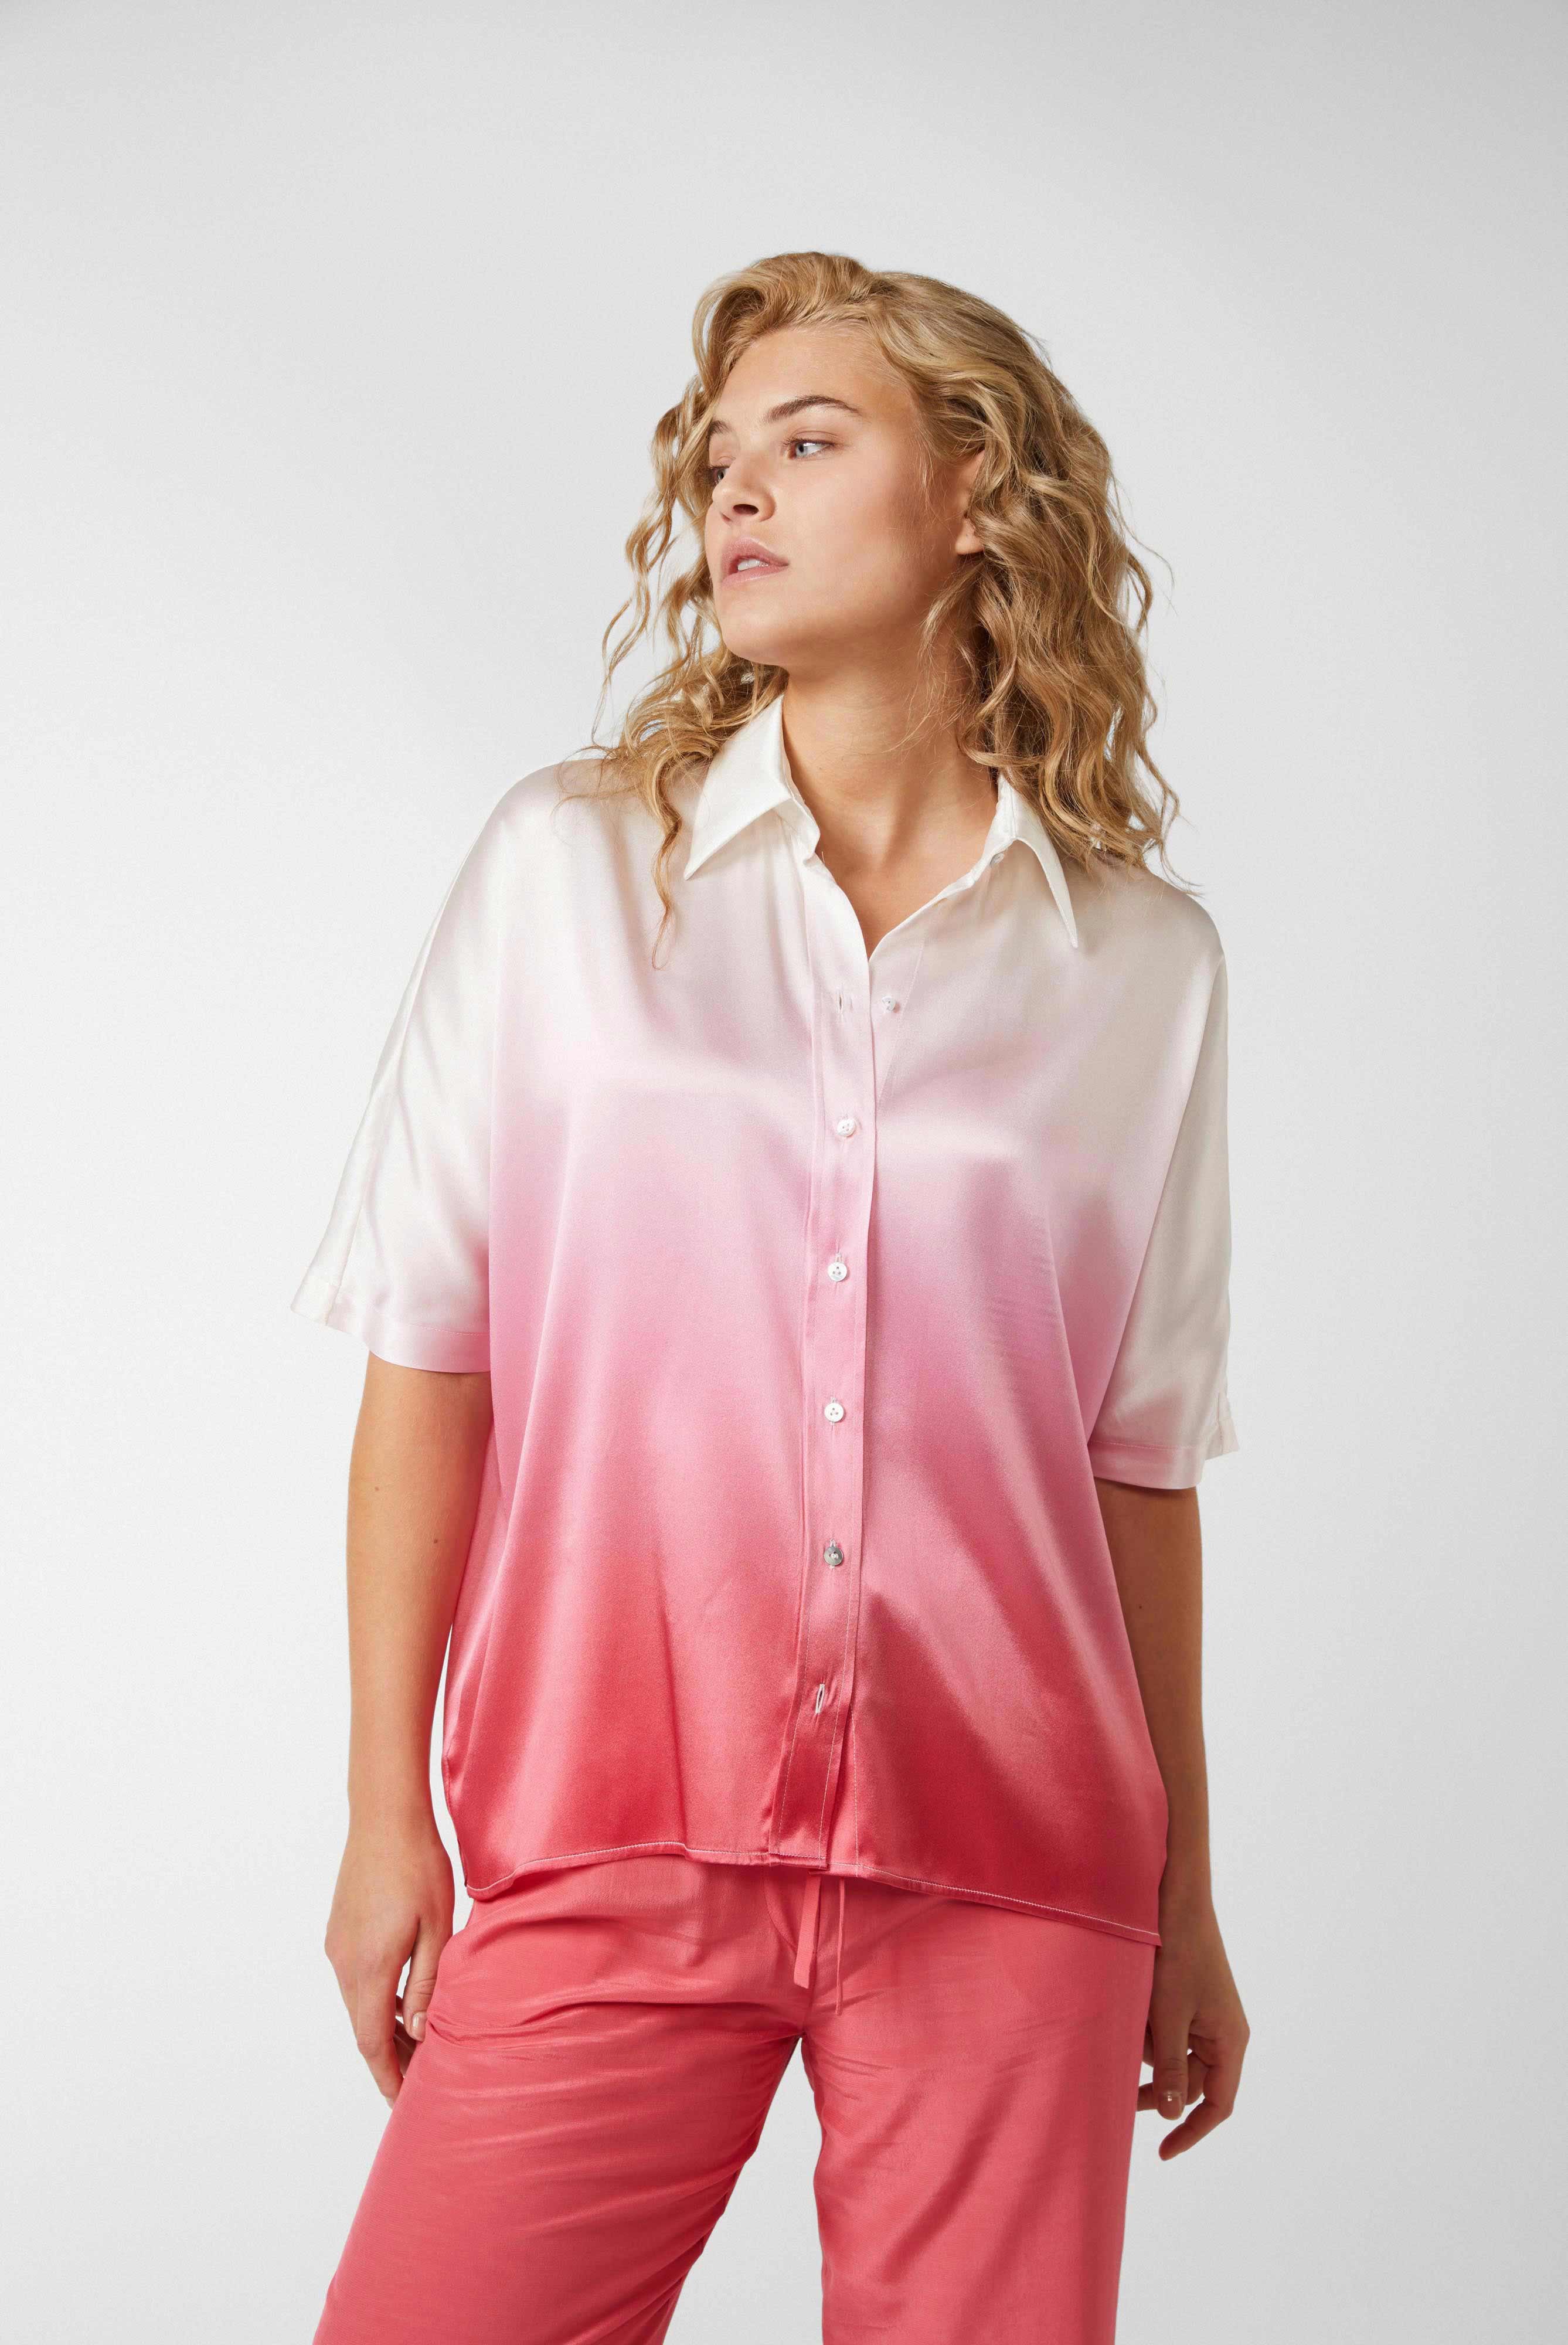 Casual Blouses+Flowing blouse with short sleeves+05.525X.DA.171980.540.46